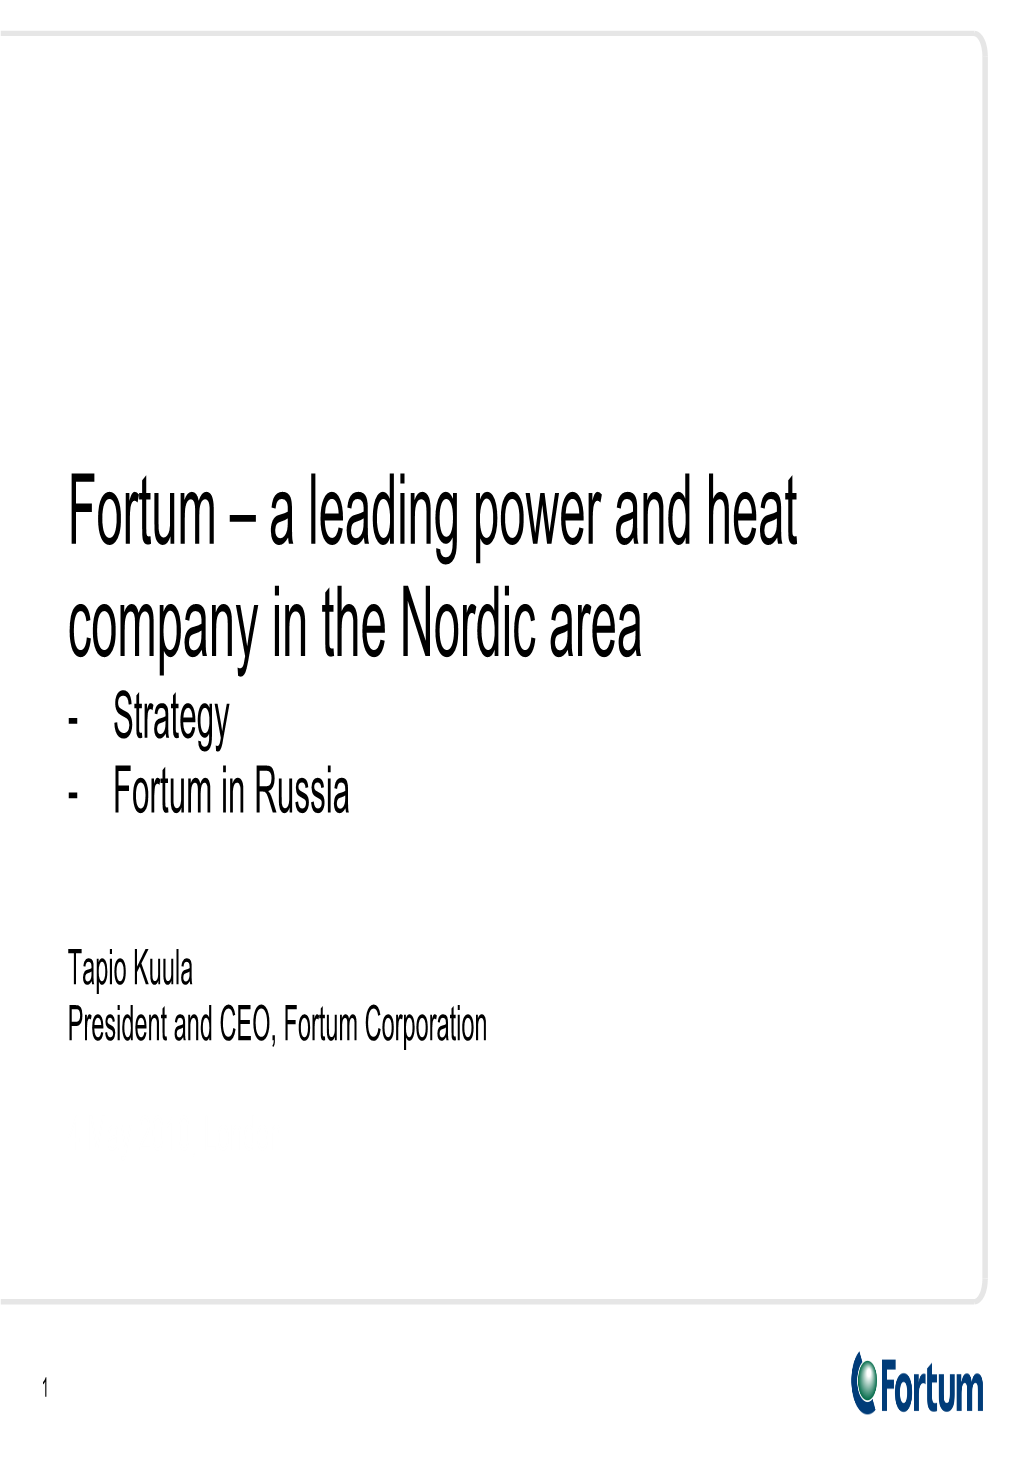 A Leading Power and Heat Company in the Nordic Area - Strategy - Fortum in Russia